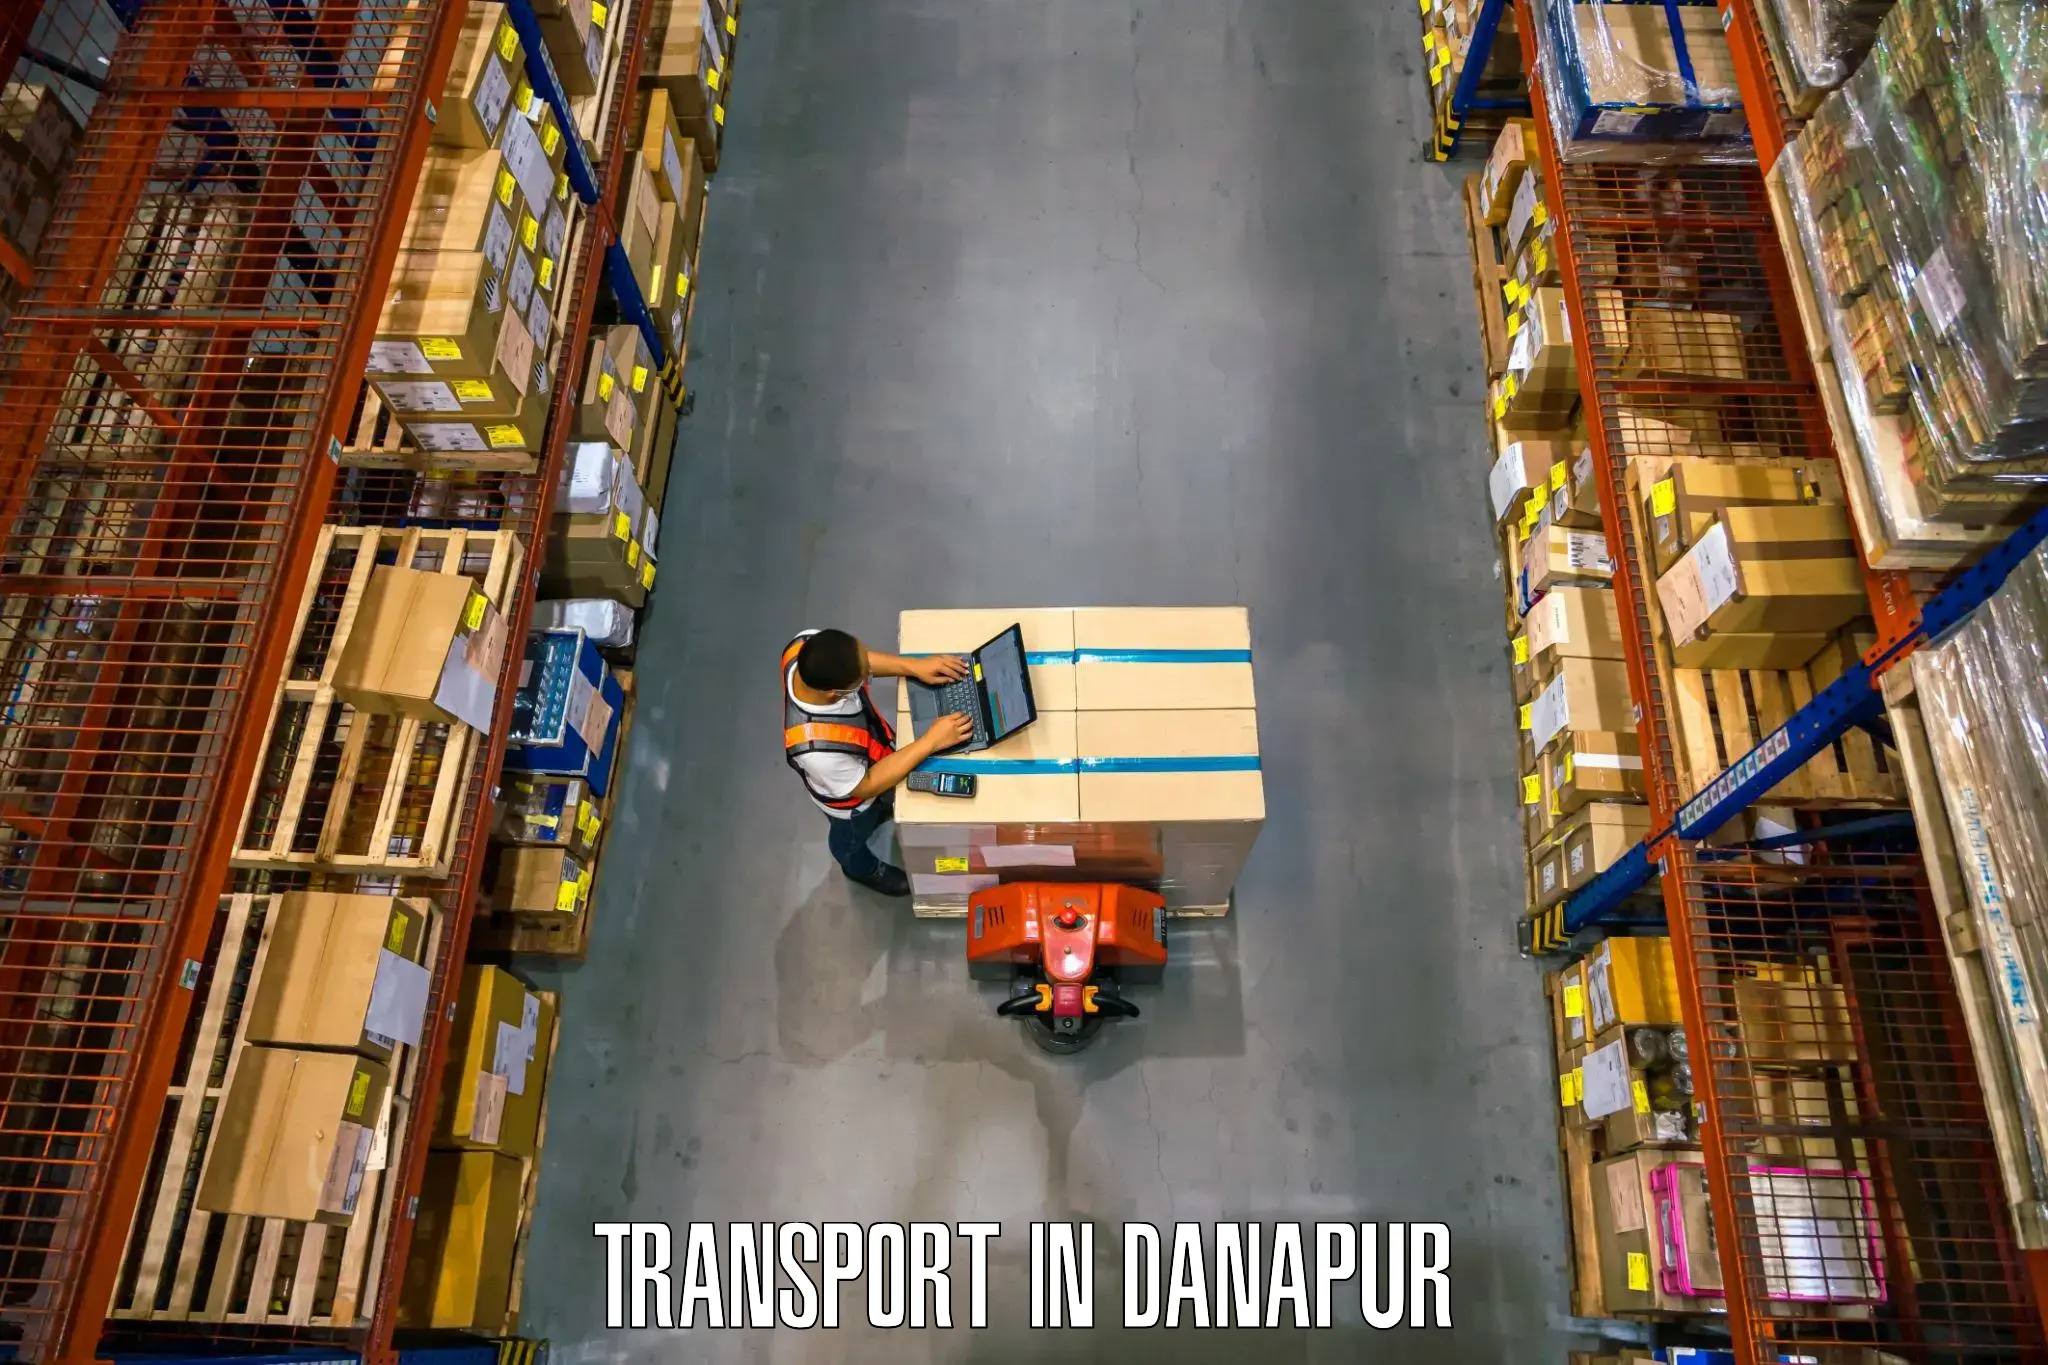 Vehicle transport services in Danapur